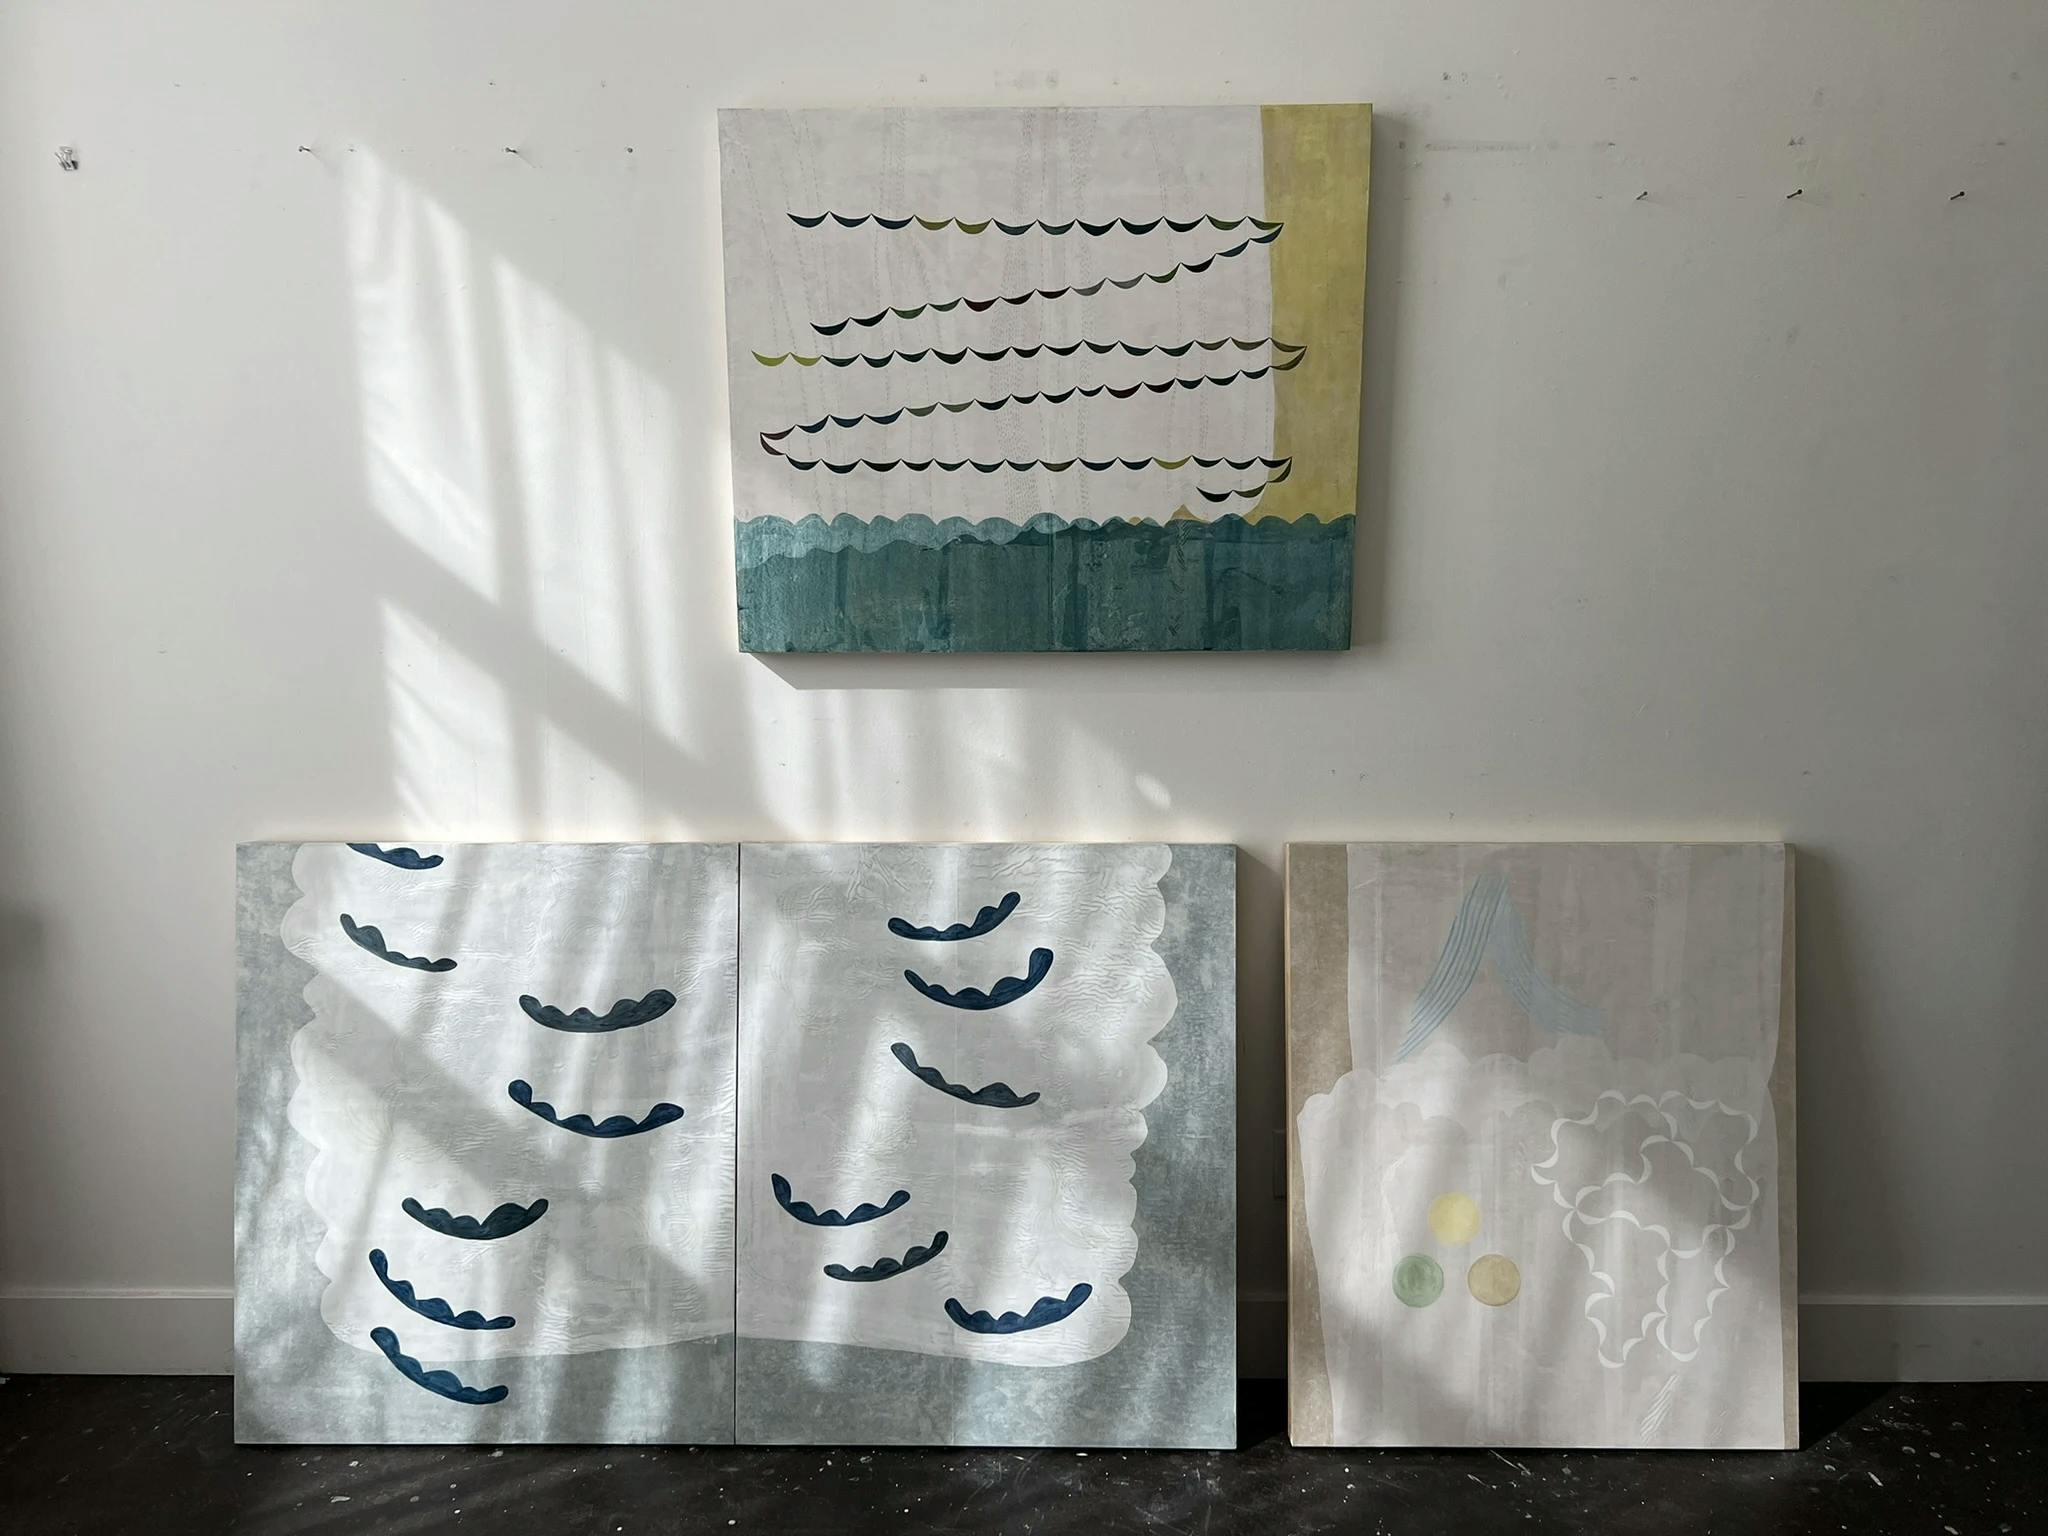 Light from windows casting shadows on three paintings by artist Lydia Bassis in her studio.